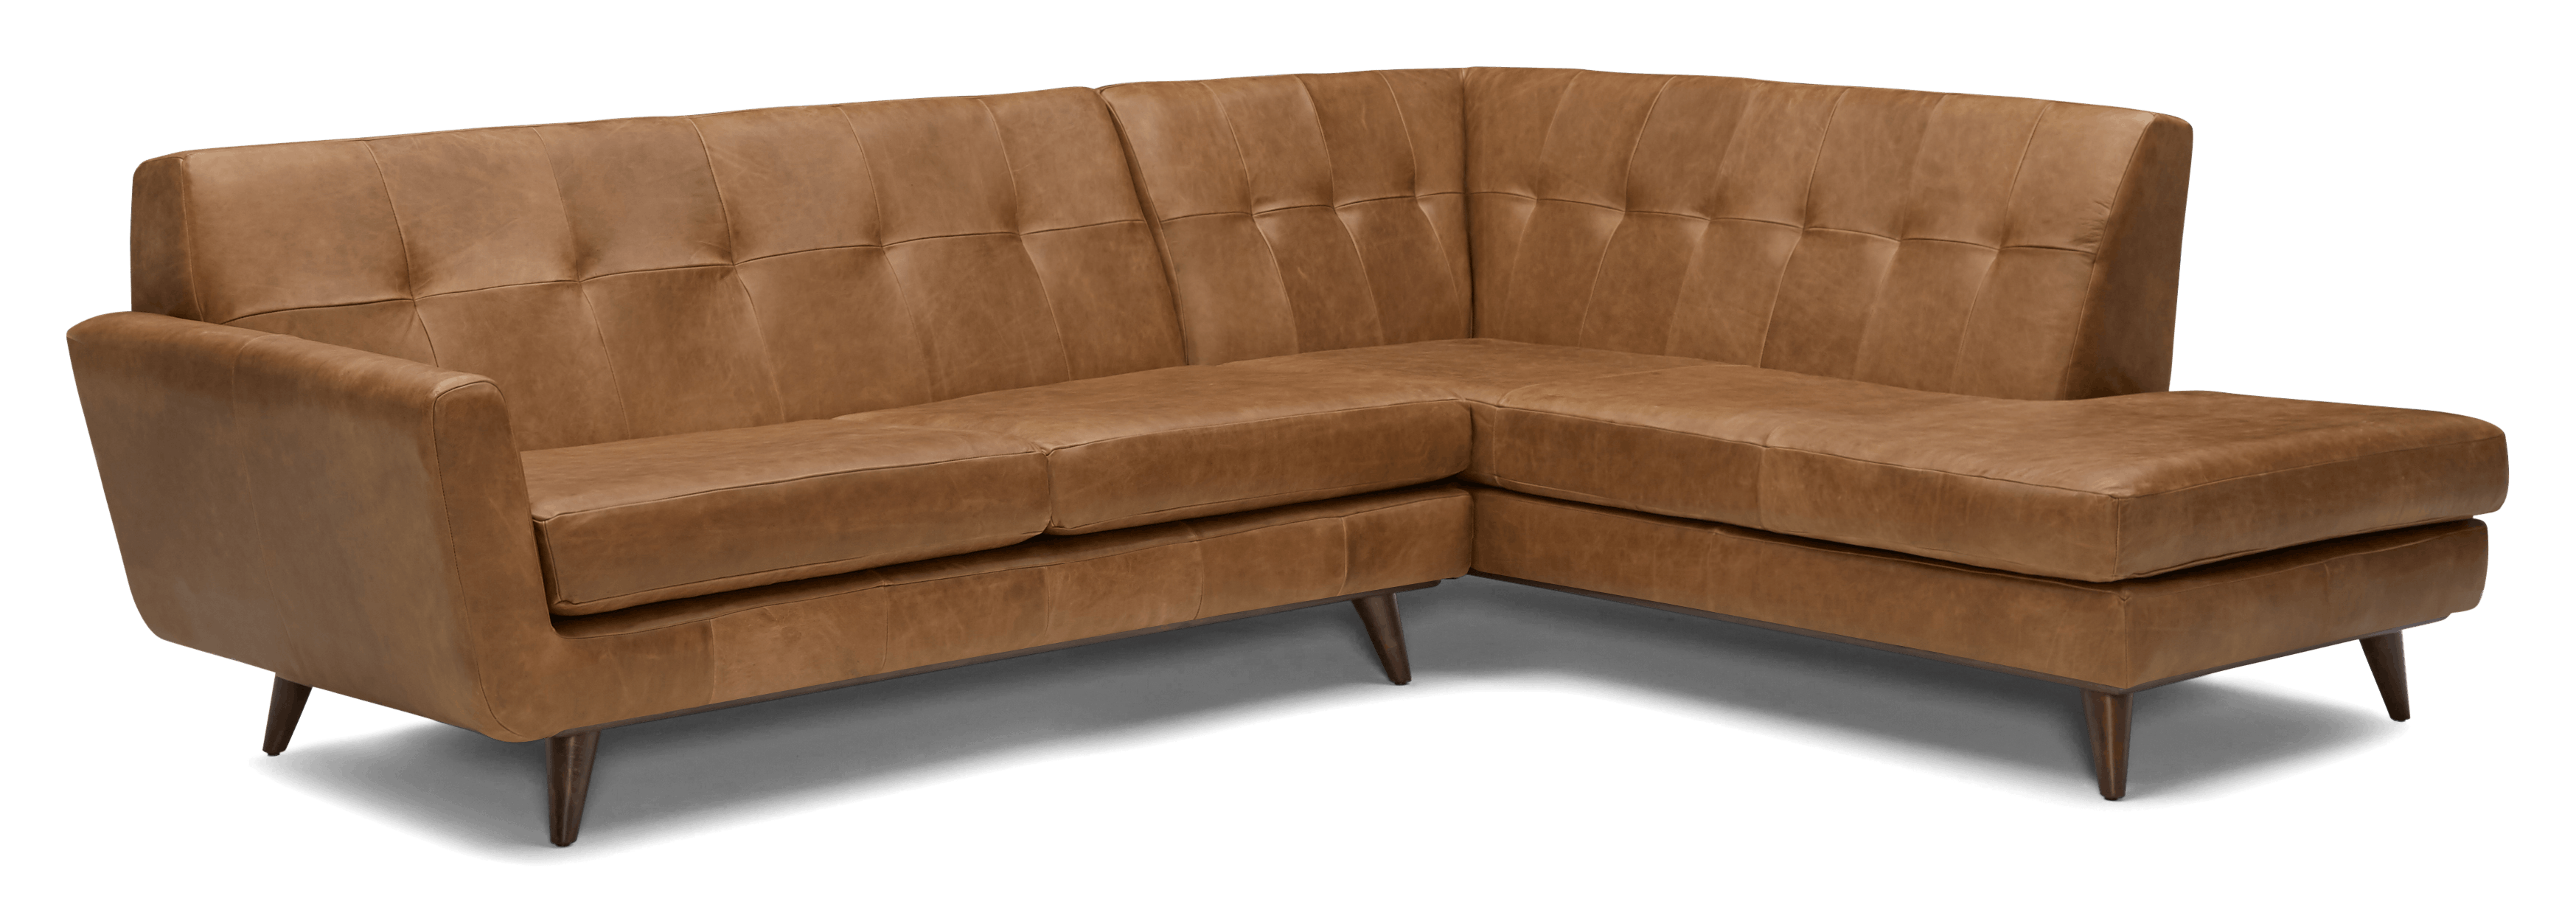 hughes leather sectional with bumper %282 piece%29 santiago ale